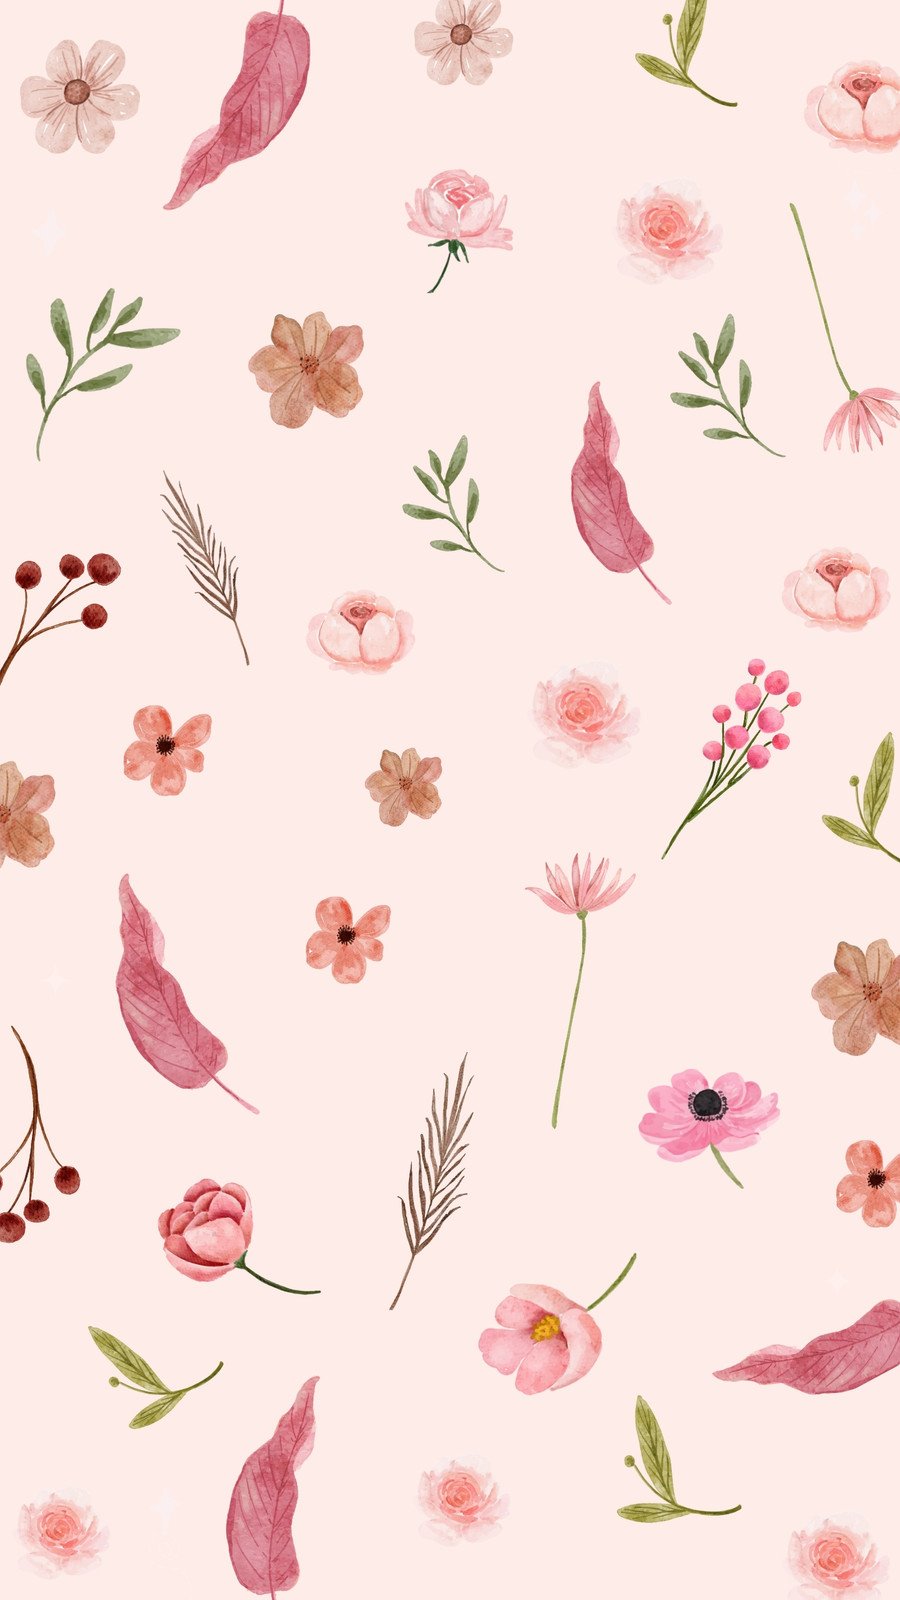 Aesthetic Cute Simple Patterns Wallpapers